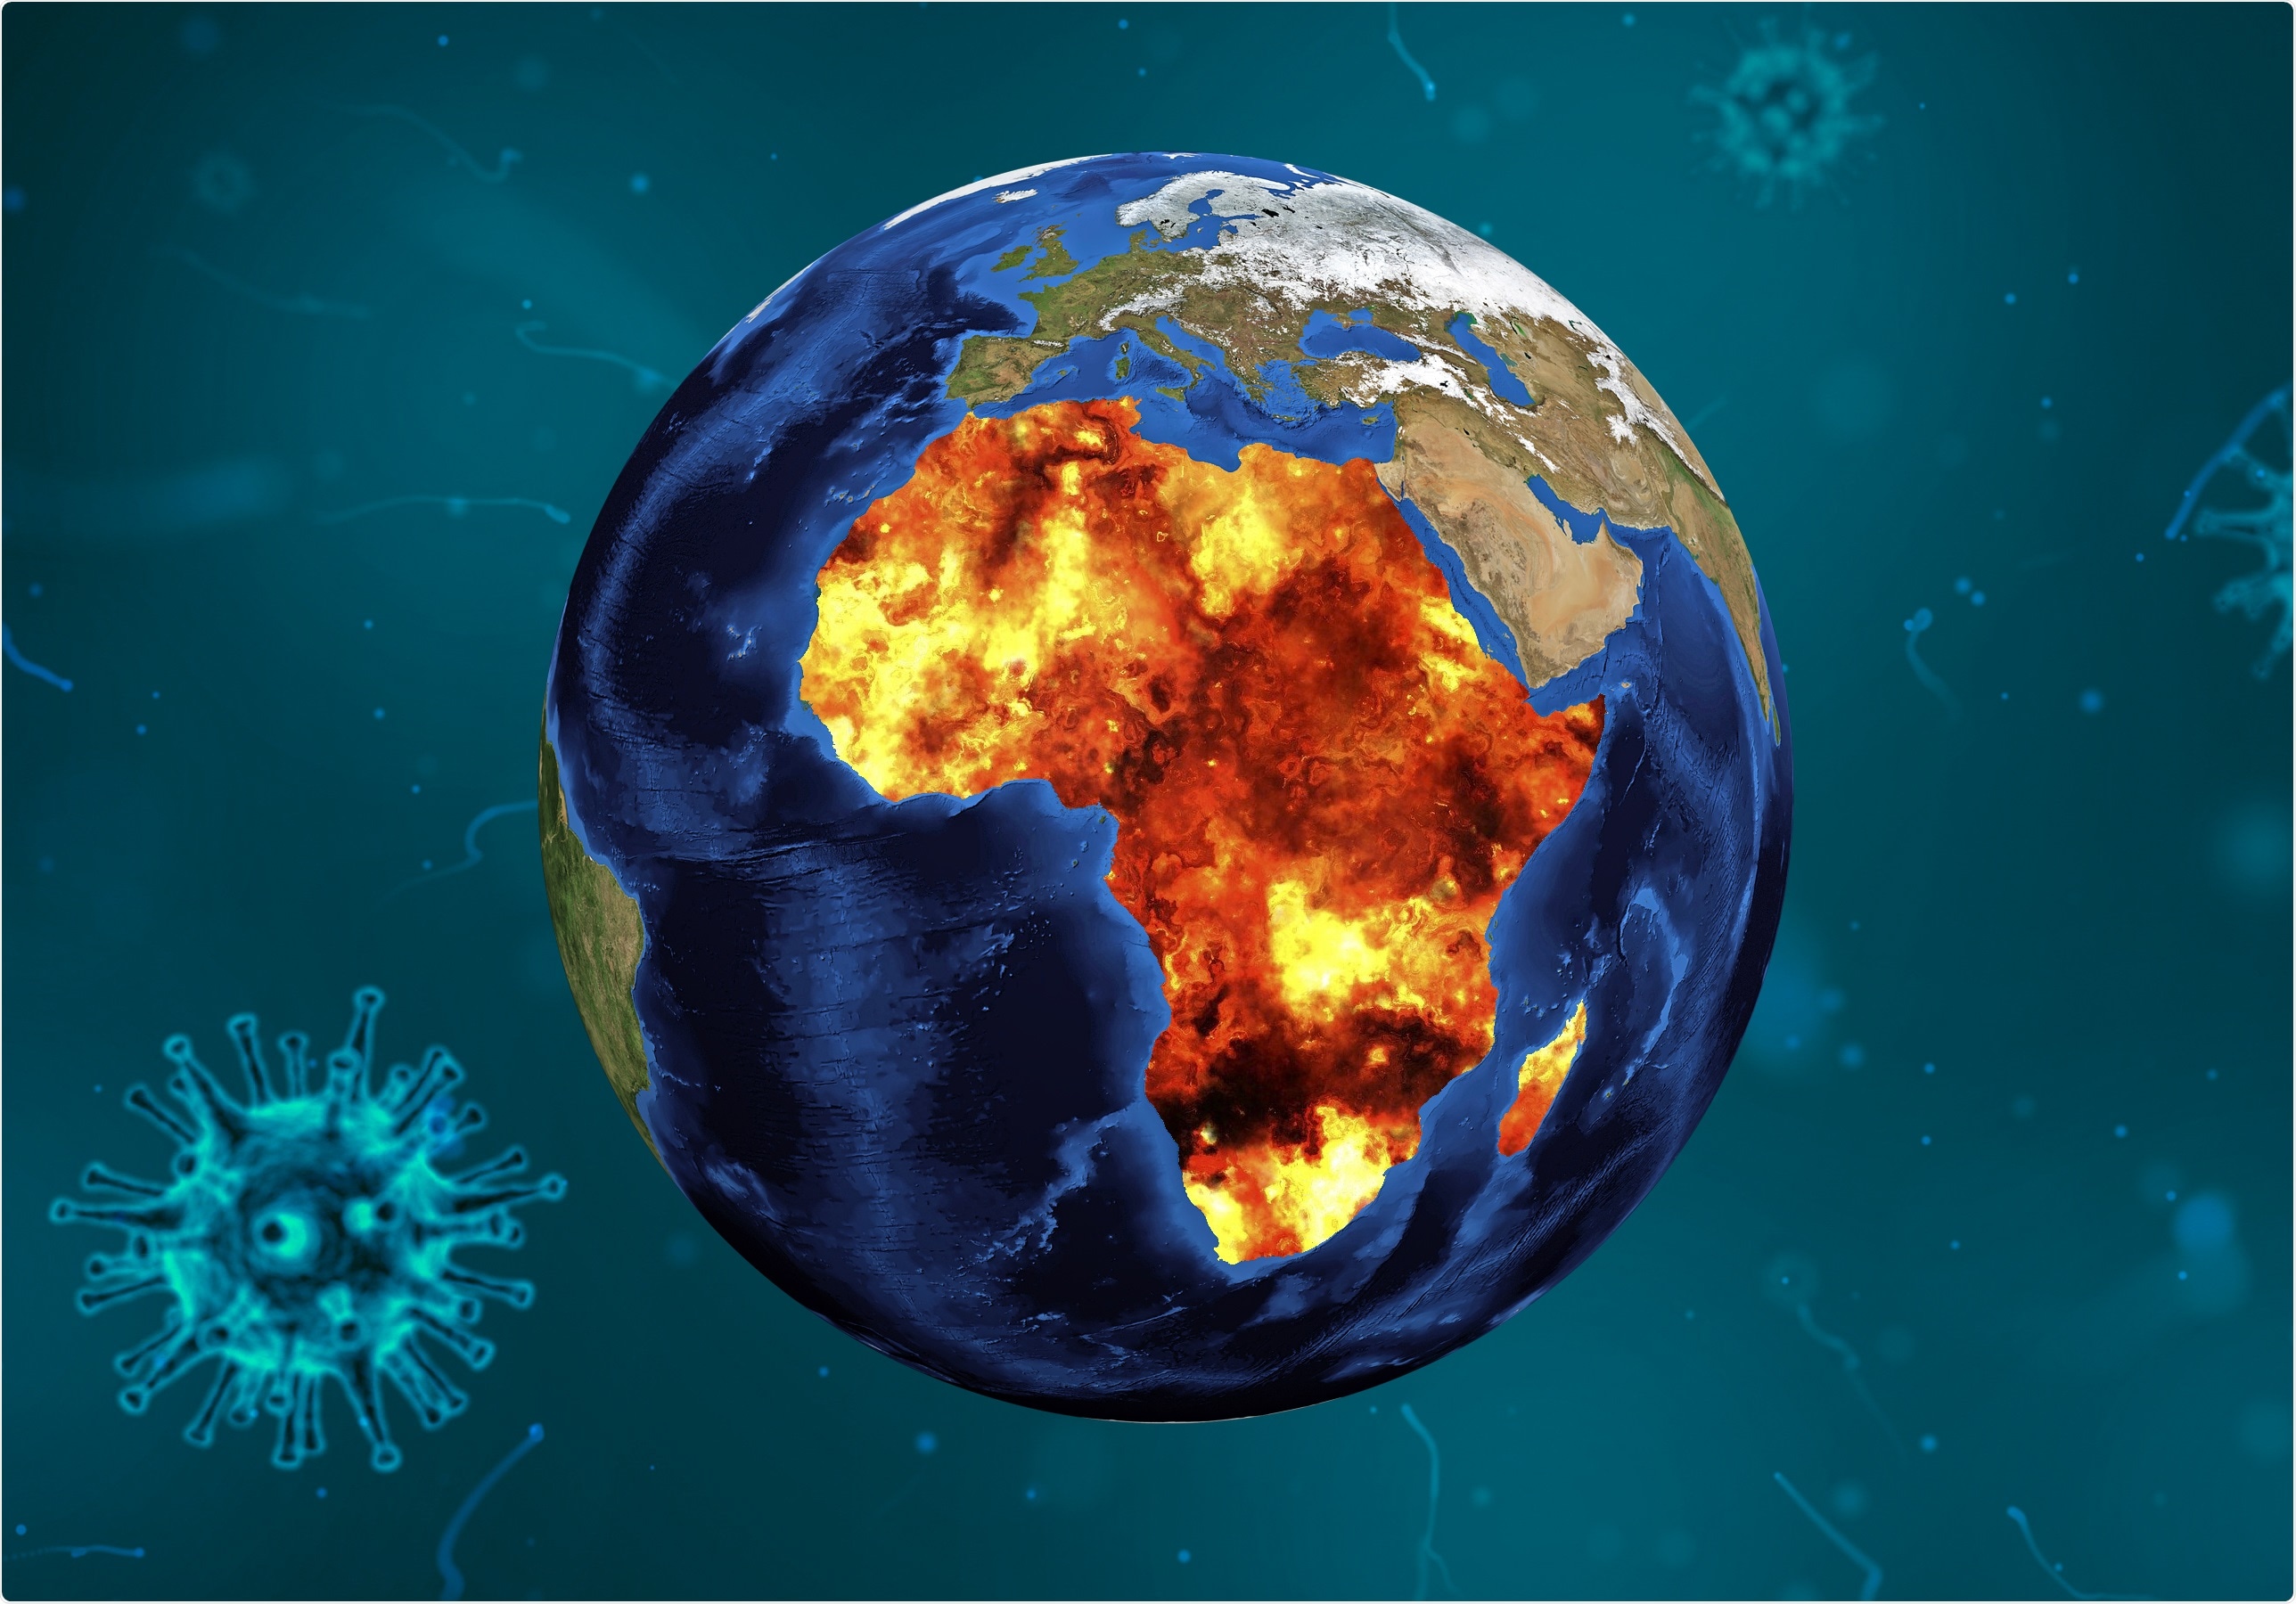 Study: COVID-19 data reporting systems in Africa reveal insights for pandemic preparedness. Image Credit: Staraldo / Shutterstock